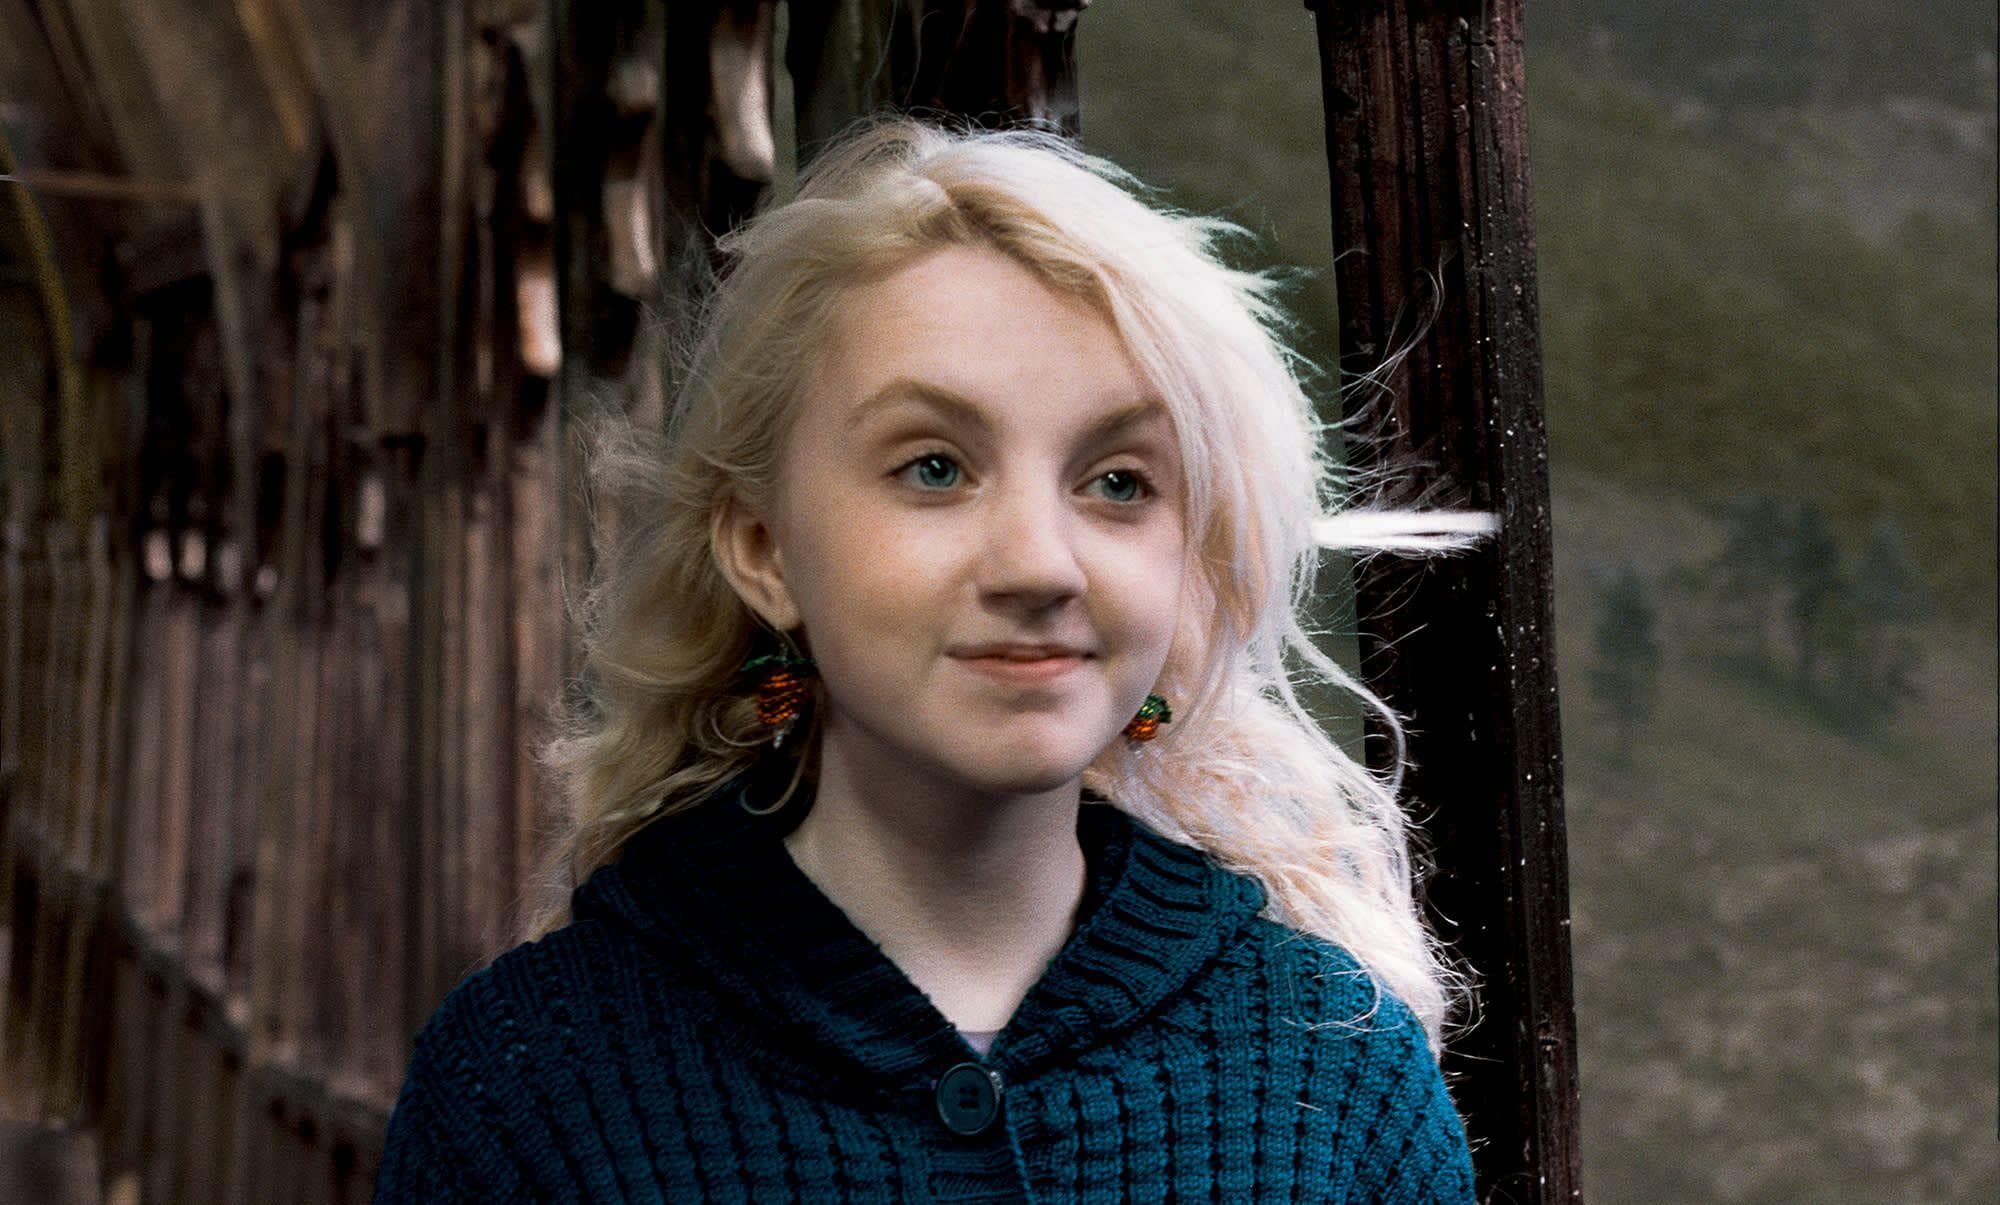 Harry Potter: Fan Casting the Hogwarts Founders According To Reddit